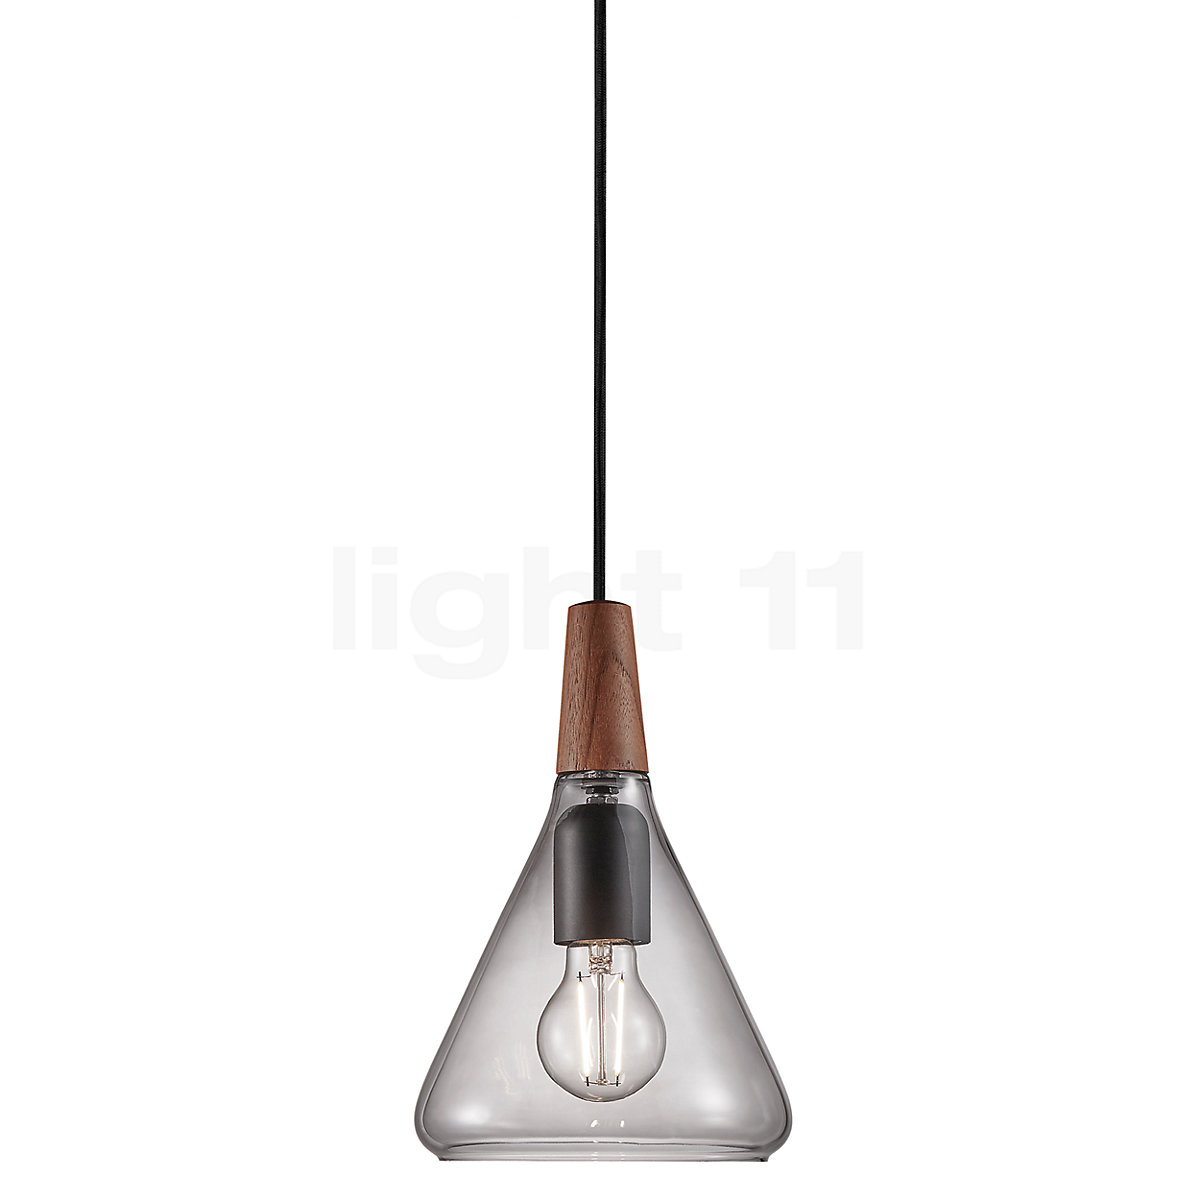 Buy Design for the People at Pendant Light Nori